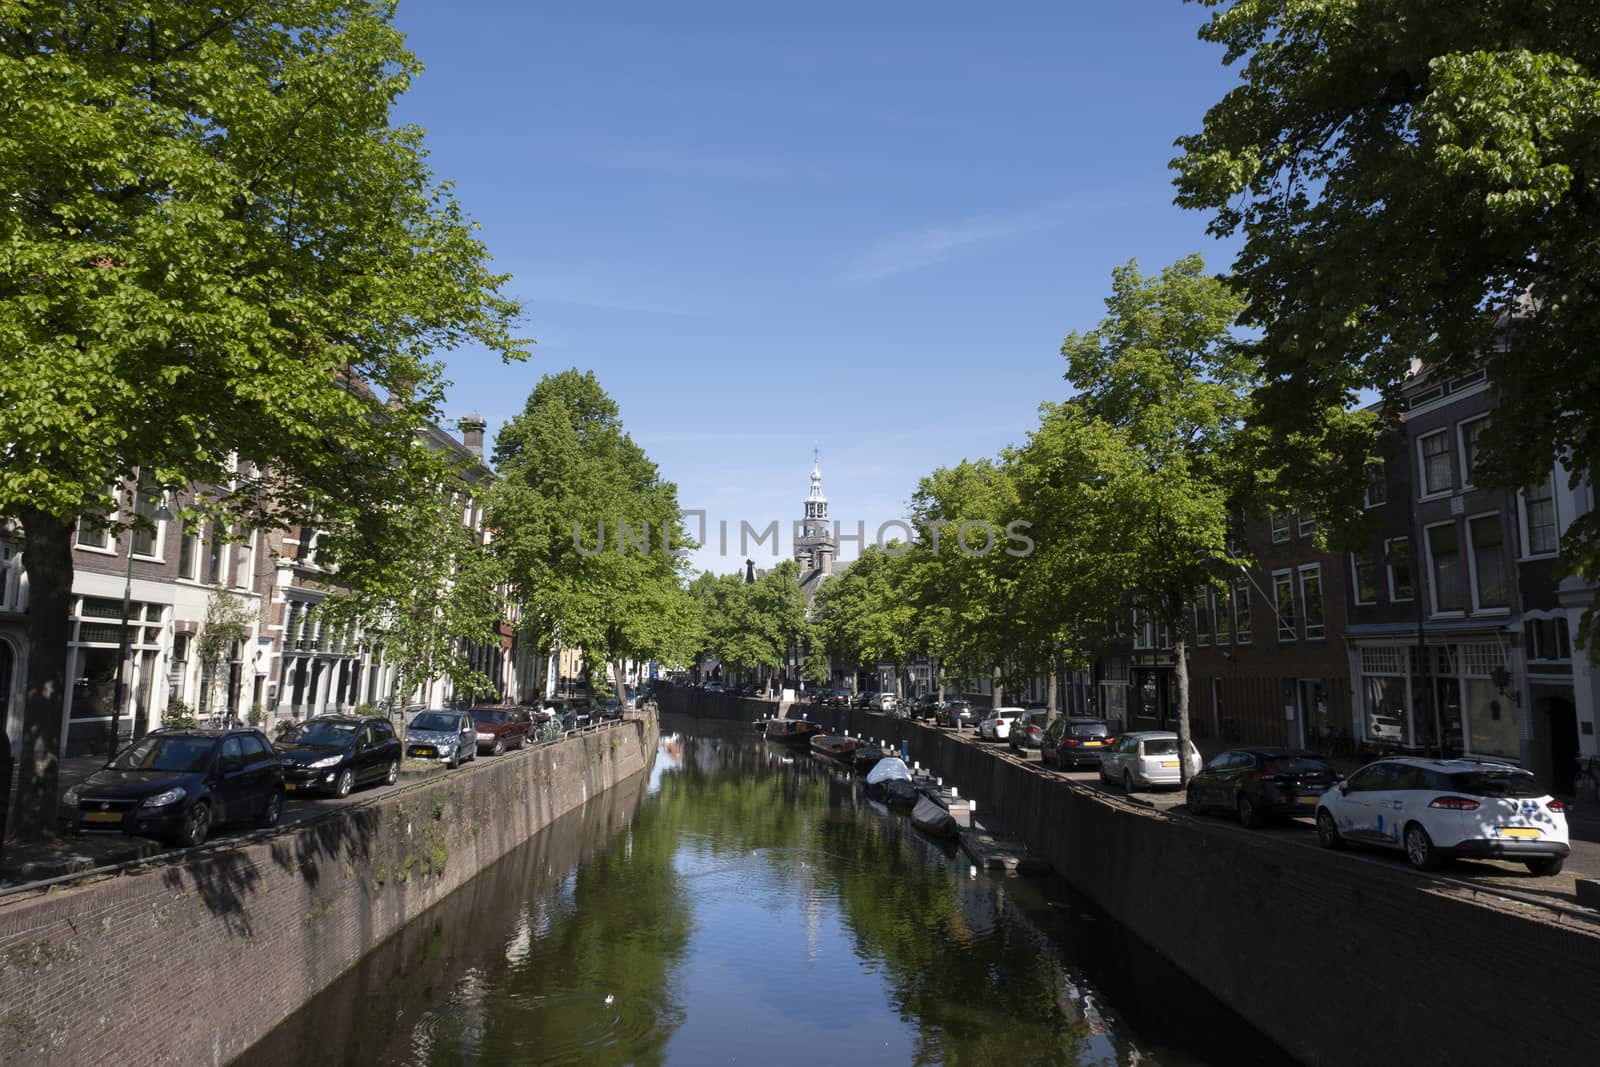 Cityscape of a canal with monumental buildings. Gouda, the Netherlands.